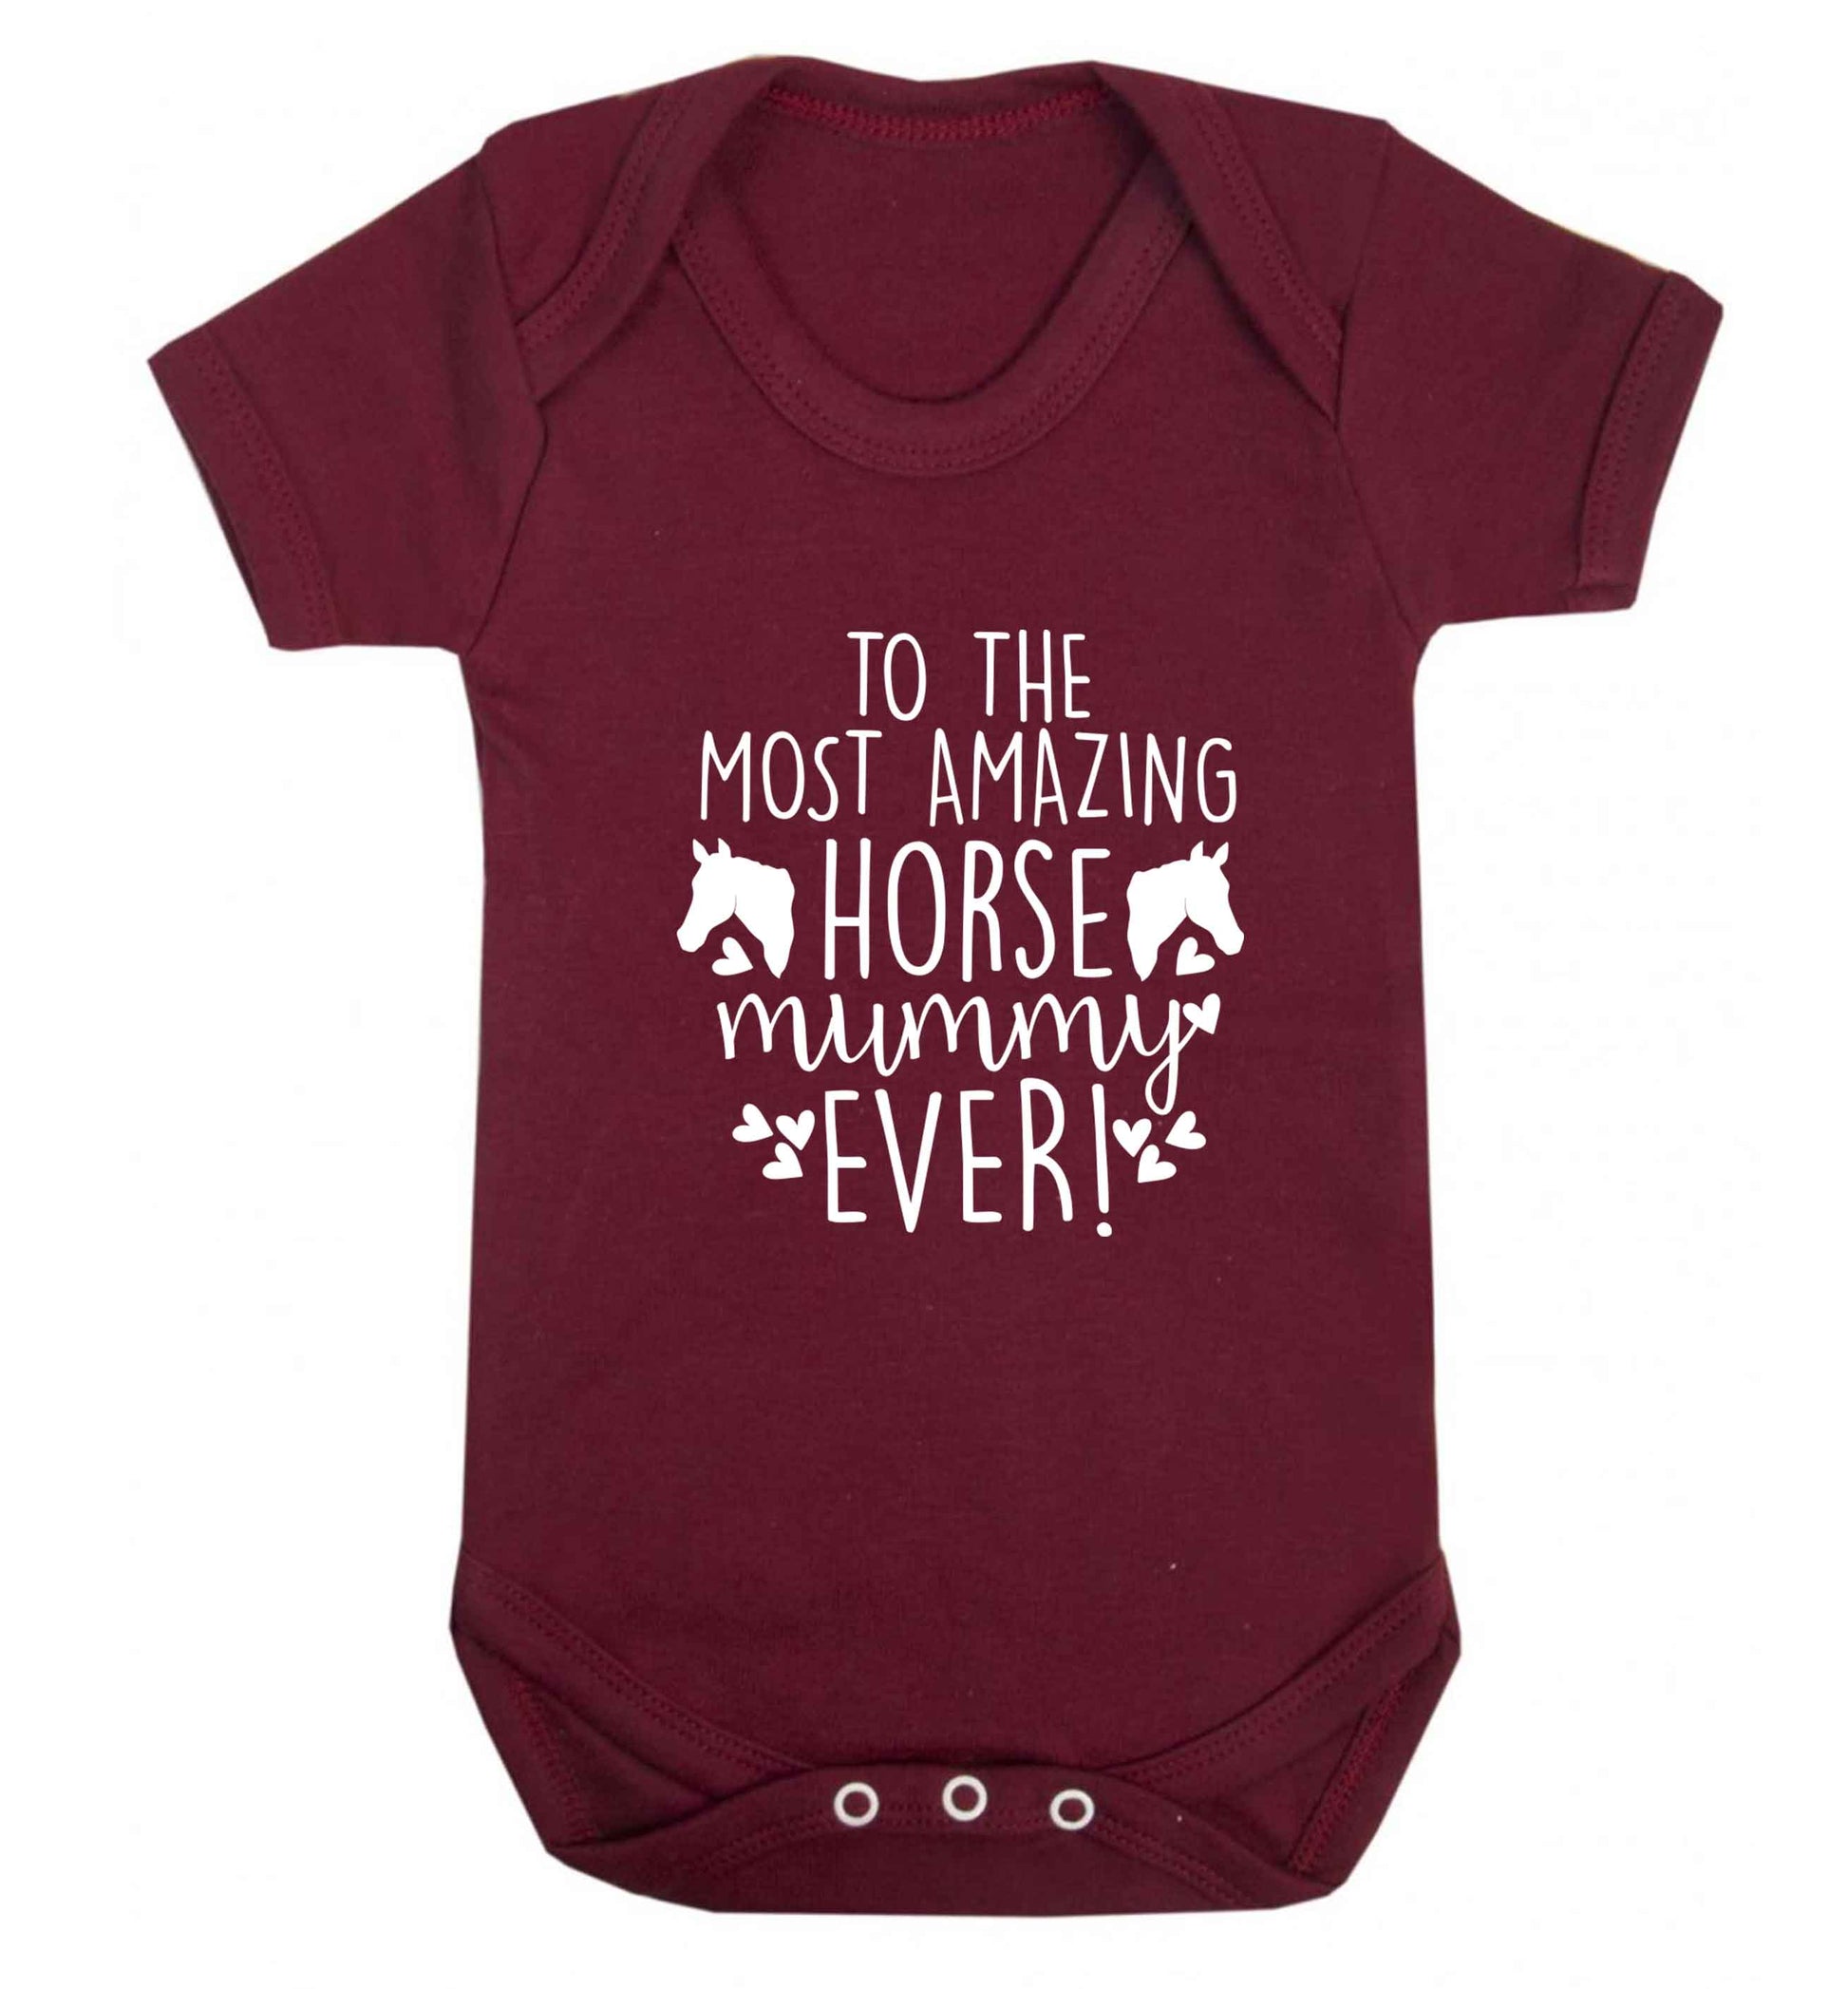 To the most amazing horse mummy ever! baby vest maroon 18-24 months